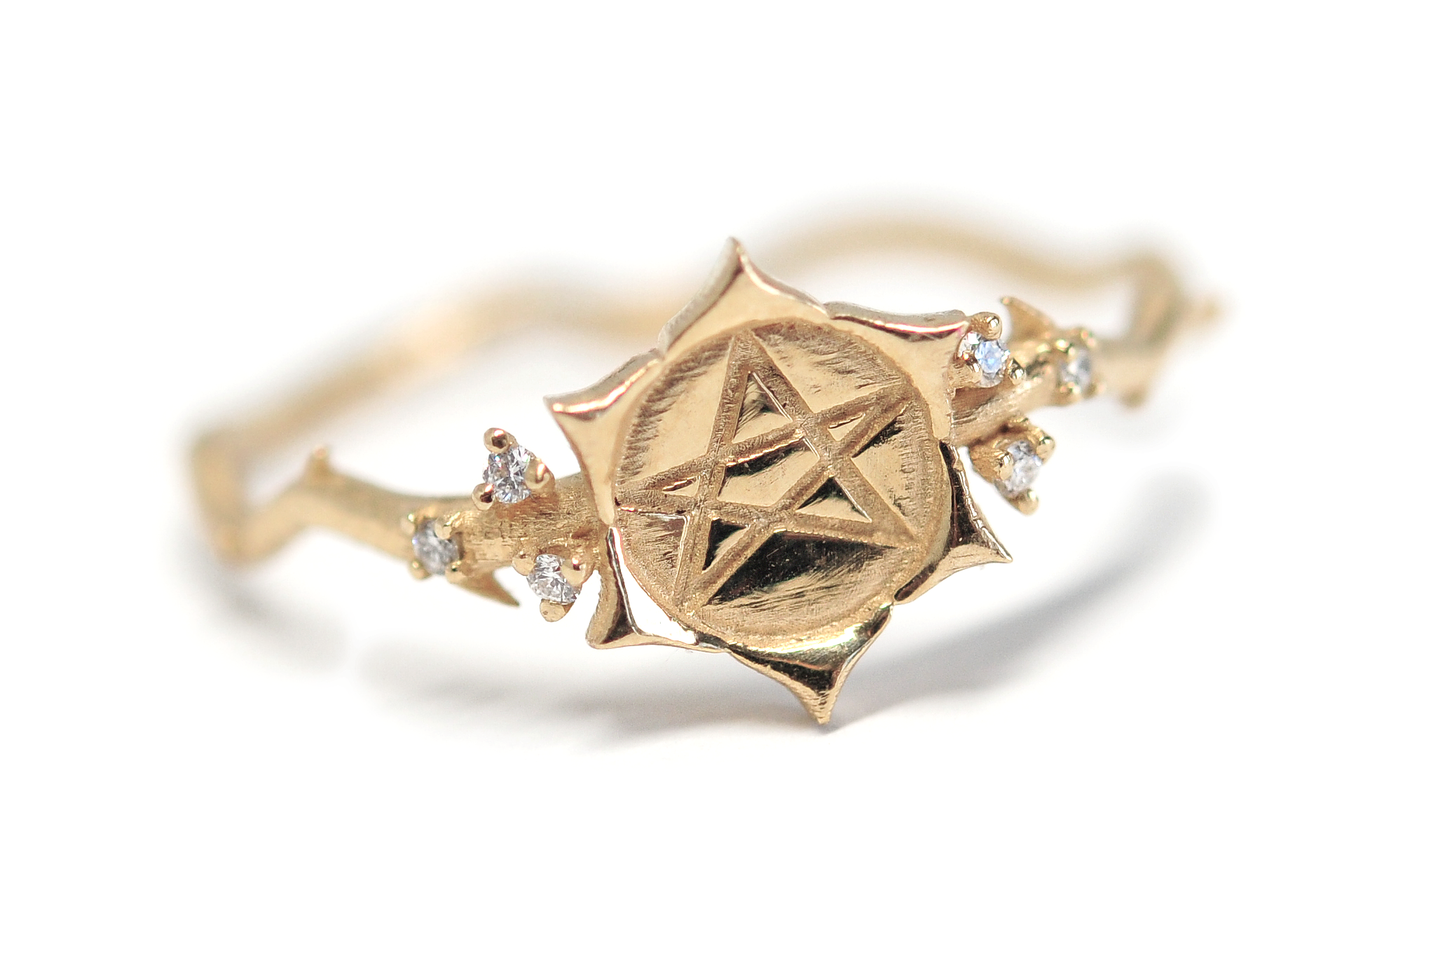 Pentacle Ring - READY-TO-SHIP